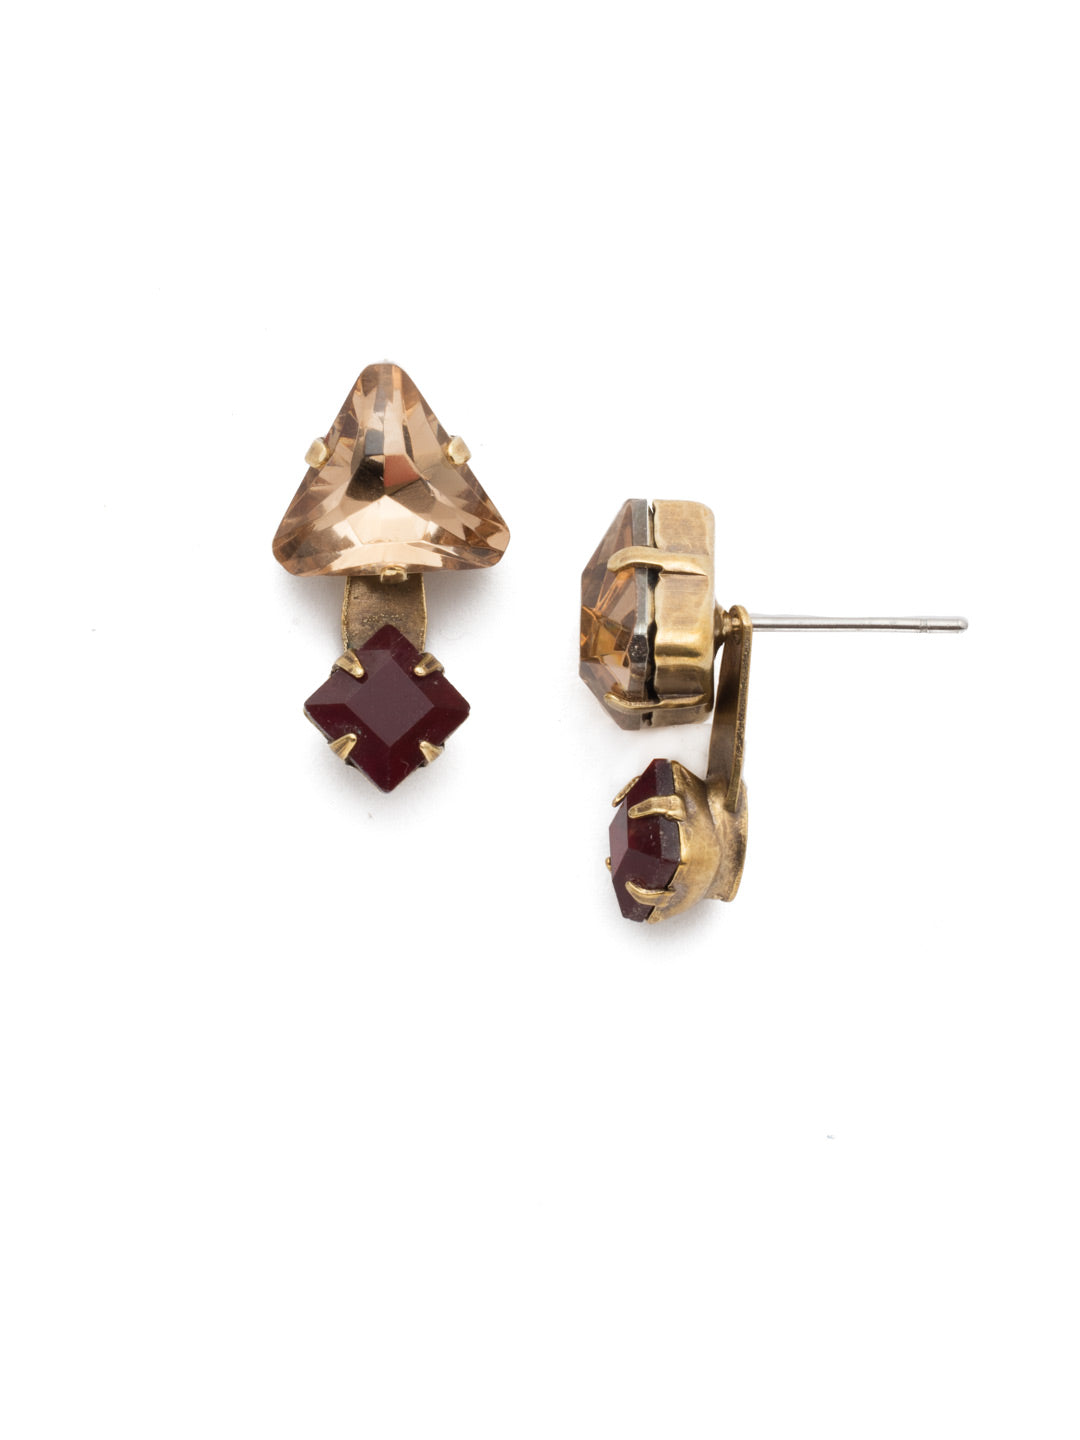 Emma Stud Earrings - EEN12AGMMA - <p>The Emma Stud Earrings are just the pair when you're looking for a bit of unique, yet subtle, sparkle. Find it with the featured triangle crystals that come together for serious sparkle. From Sorrelli's Mighty Maroon collection in our Antique Gold-tone finish.</p>